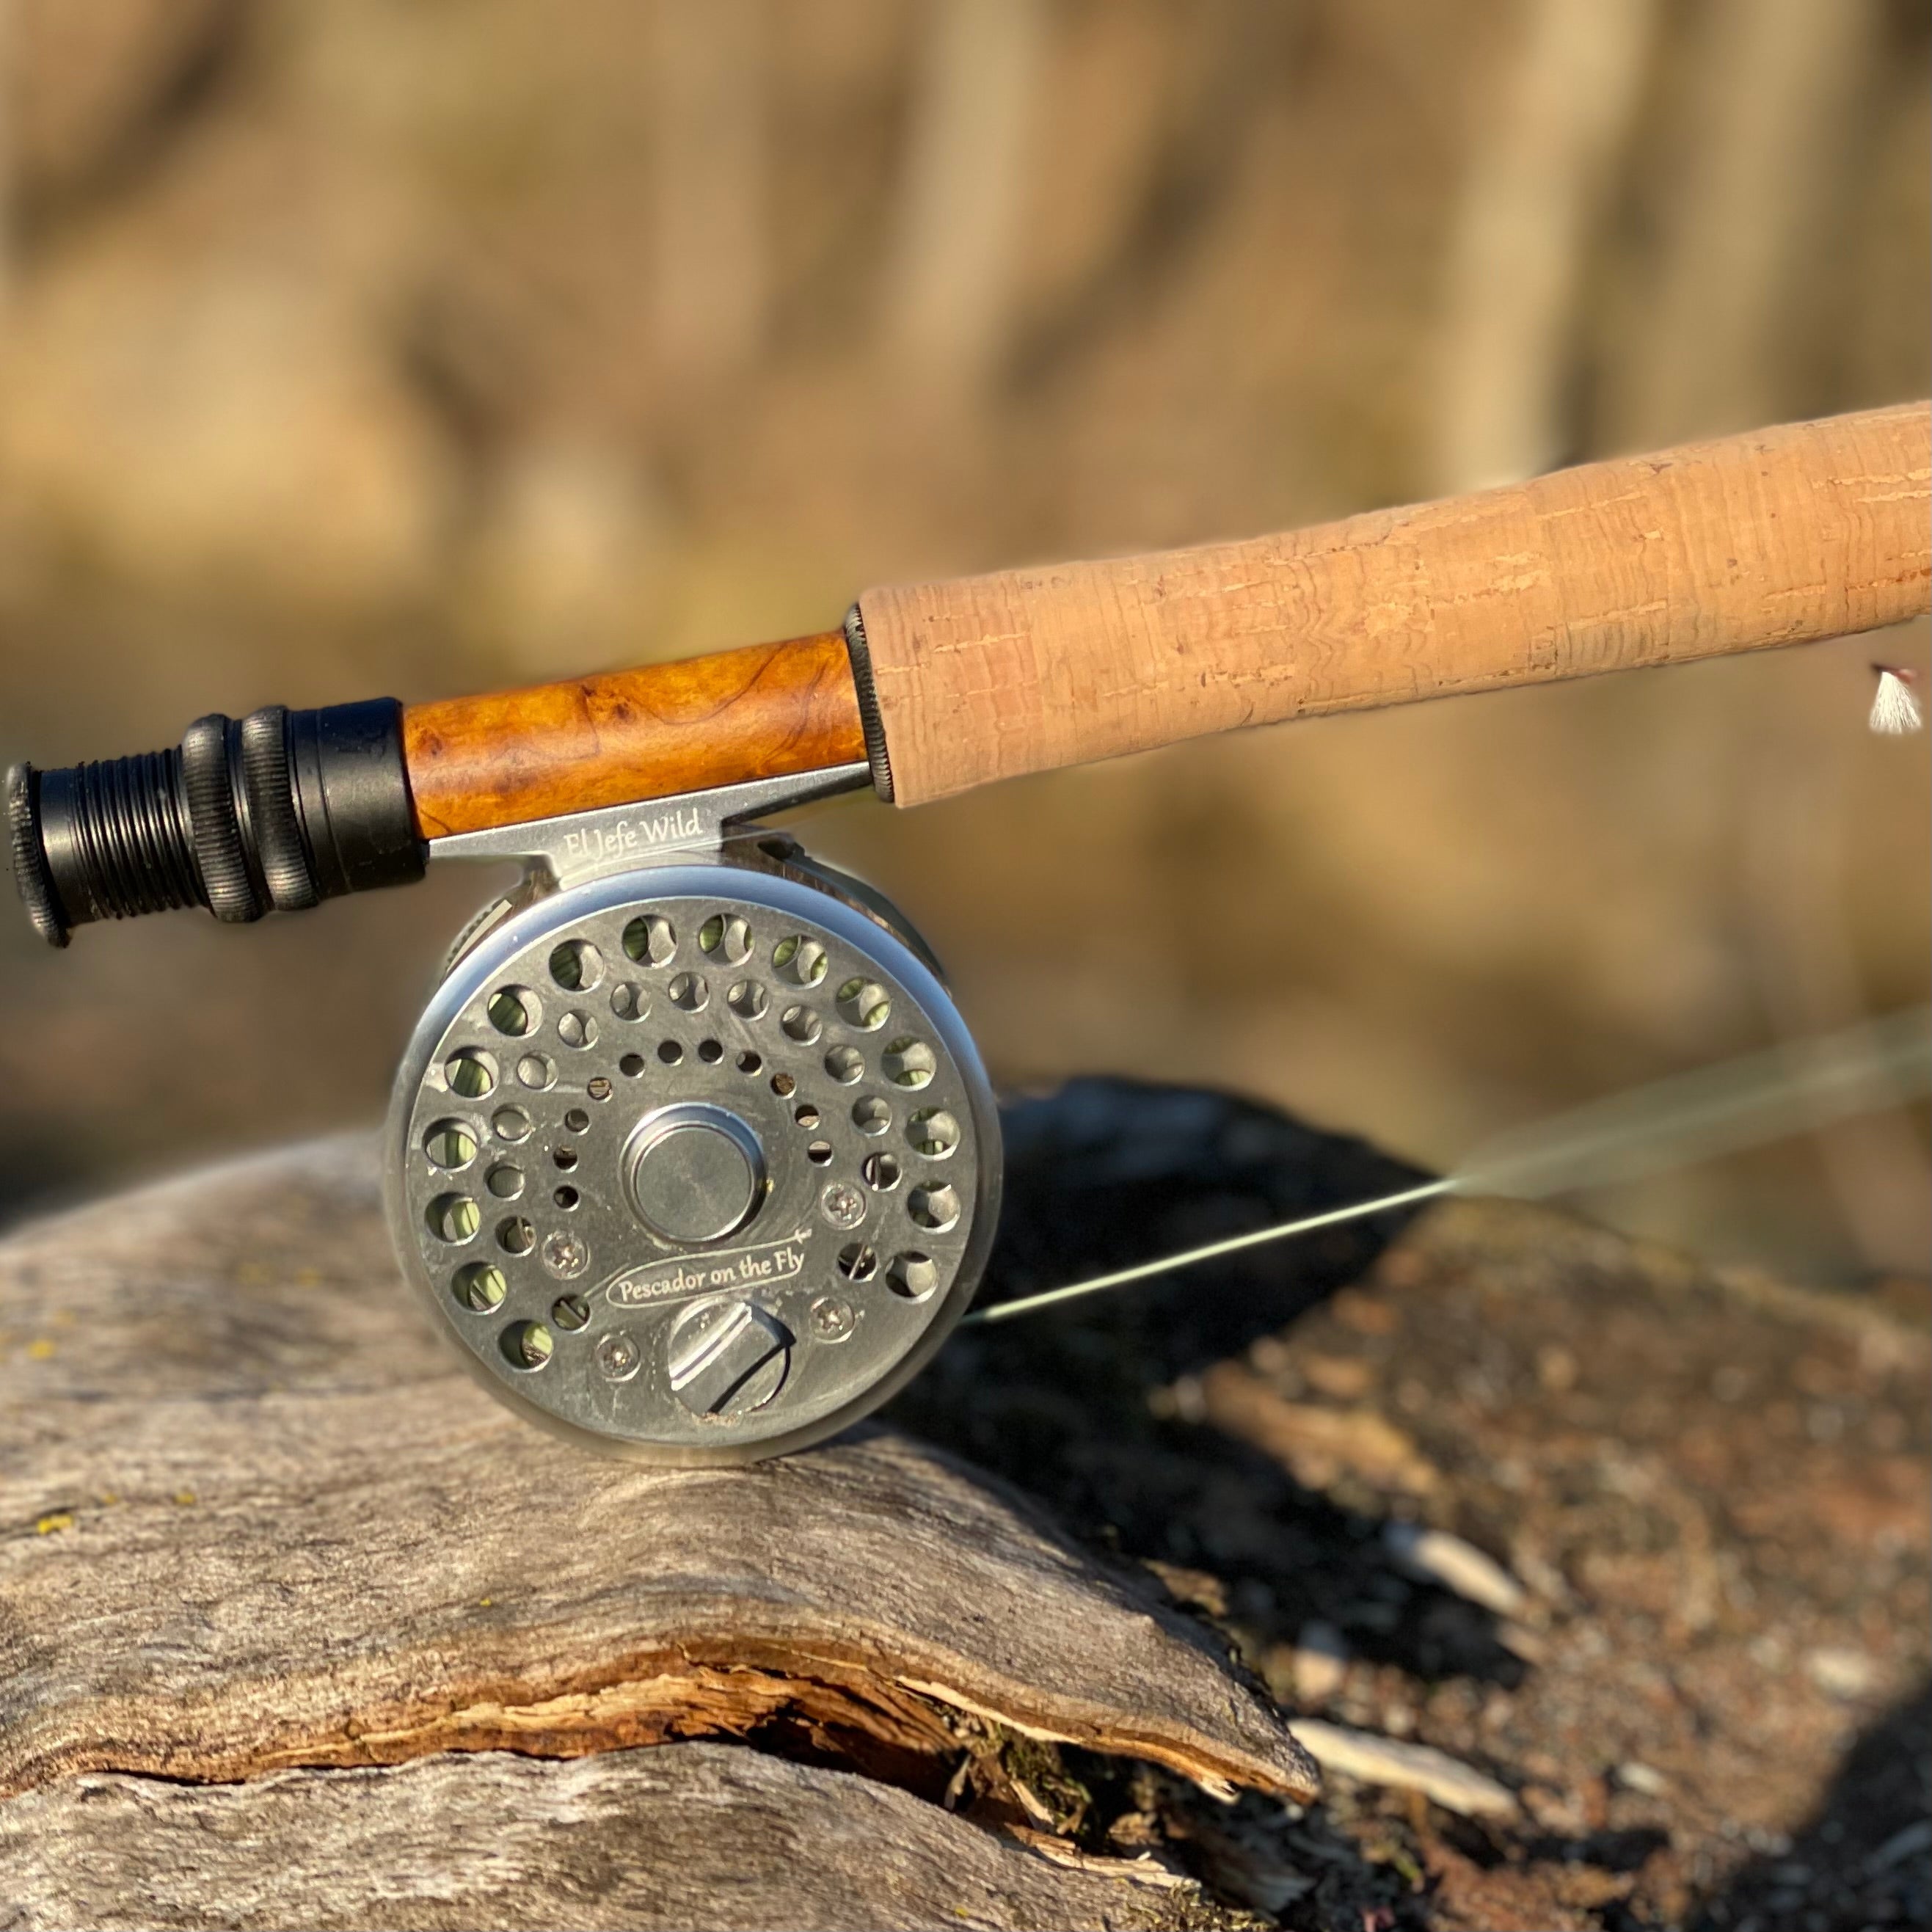 El Jefe Wild Fly Fishing Combo Package | 664 | 6'6'' Four Section 0 Weight Fly Rod & Reel Outfit